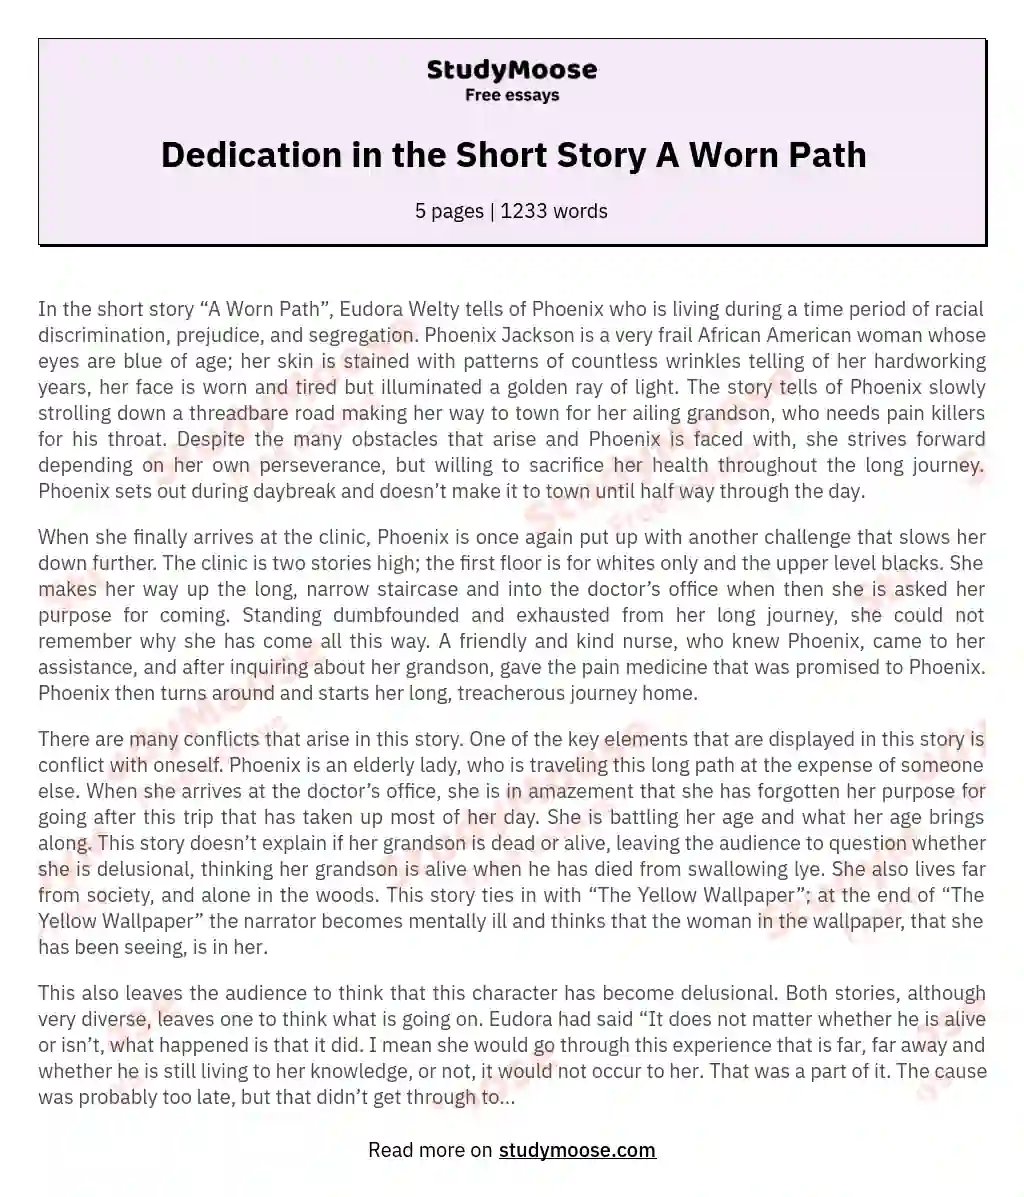 Dedication in the Short Story A Worn Path